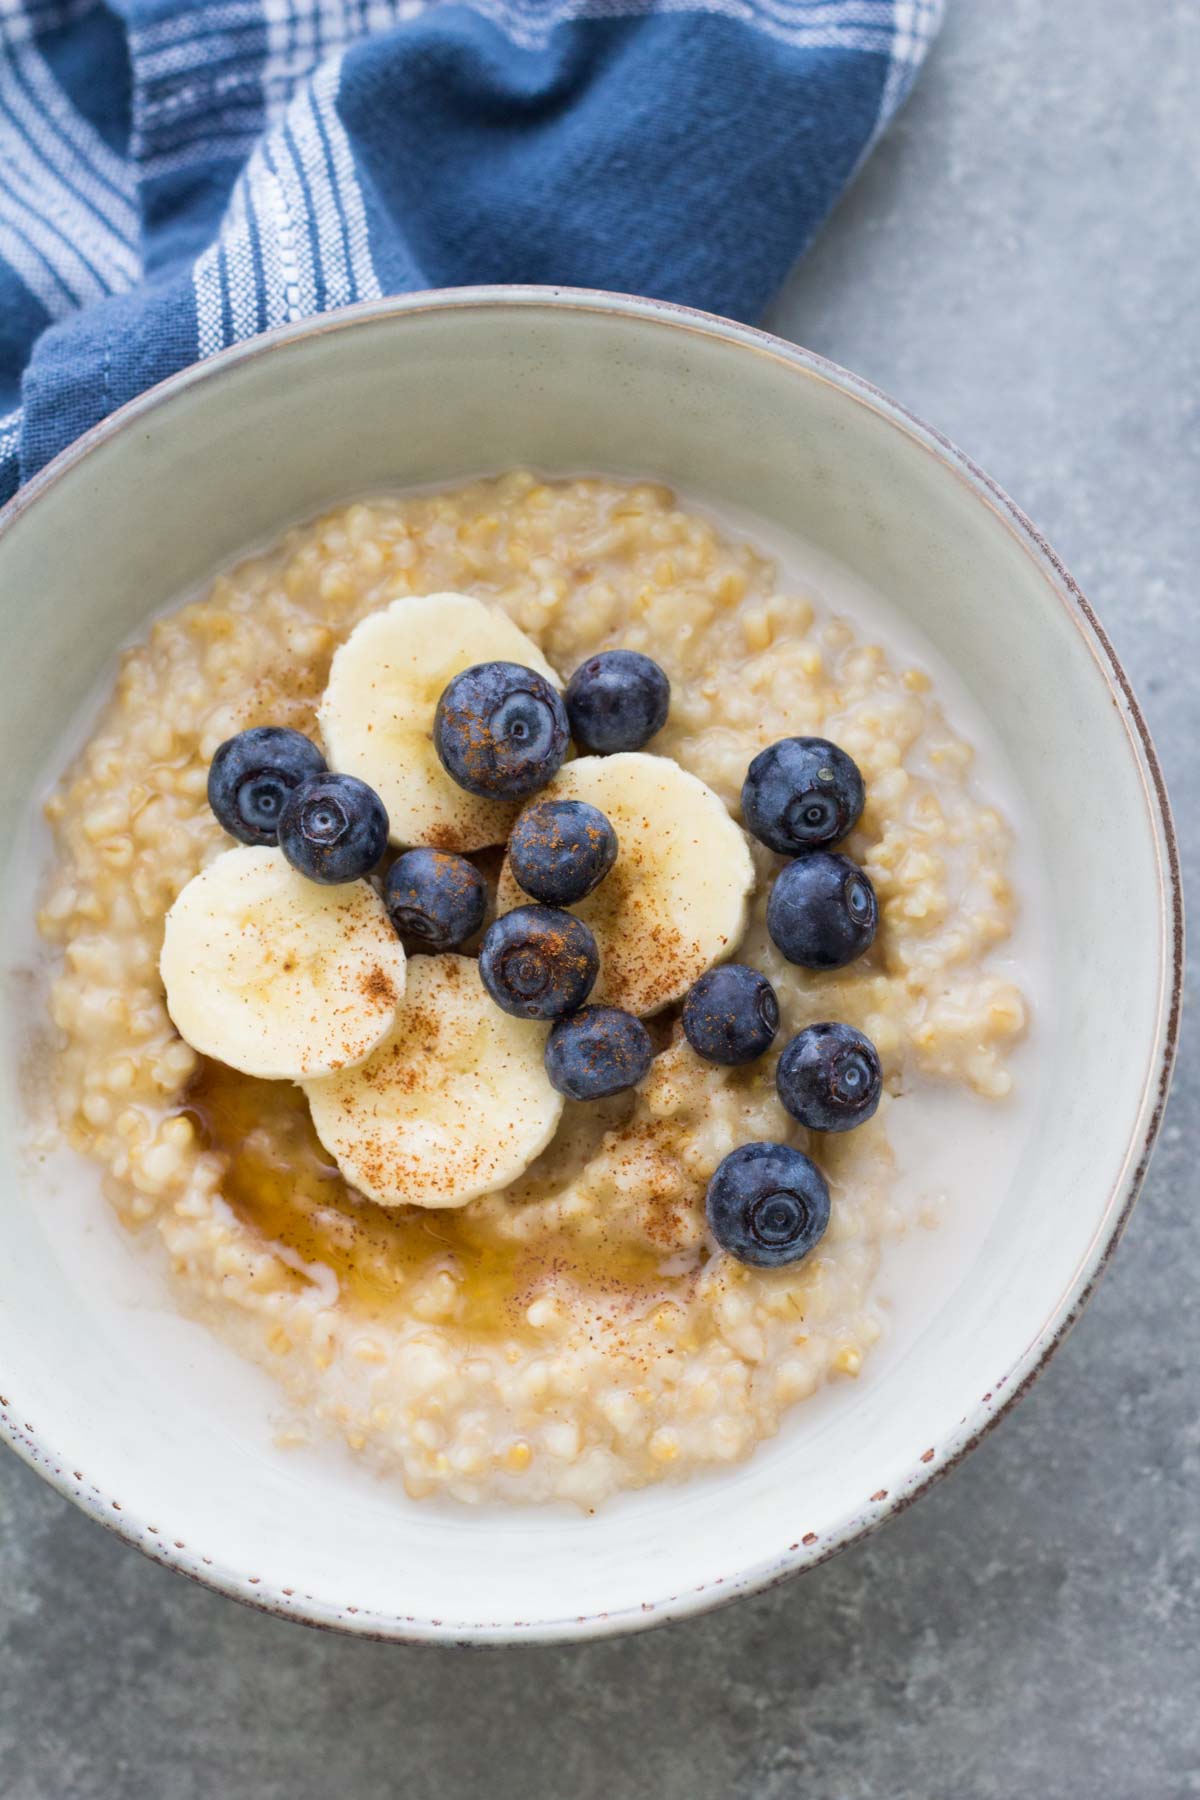 Bowl of steel cut oats topped with maple syrup, sliced banana, blueberries and cinnamon.